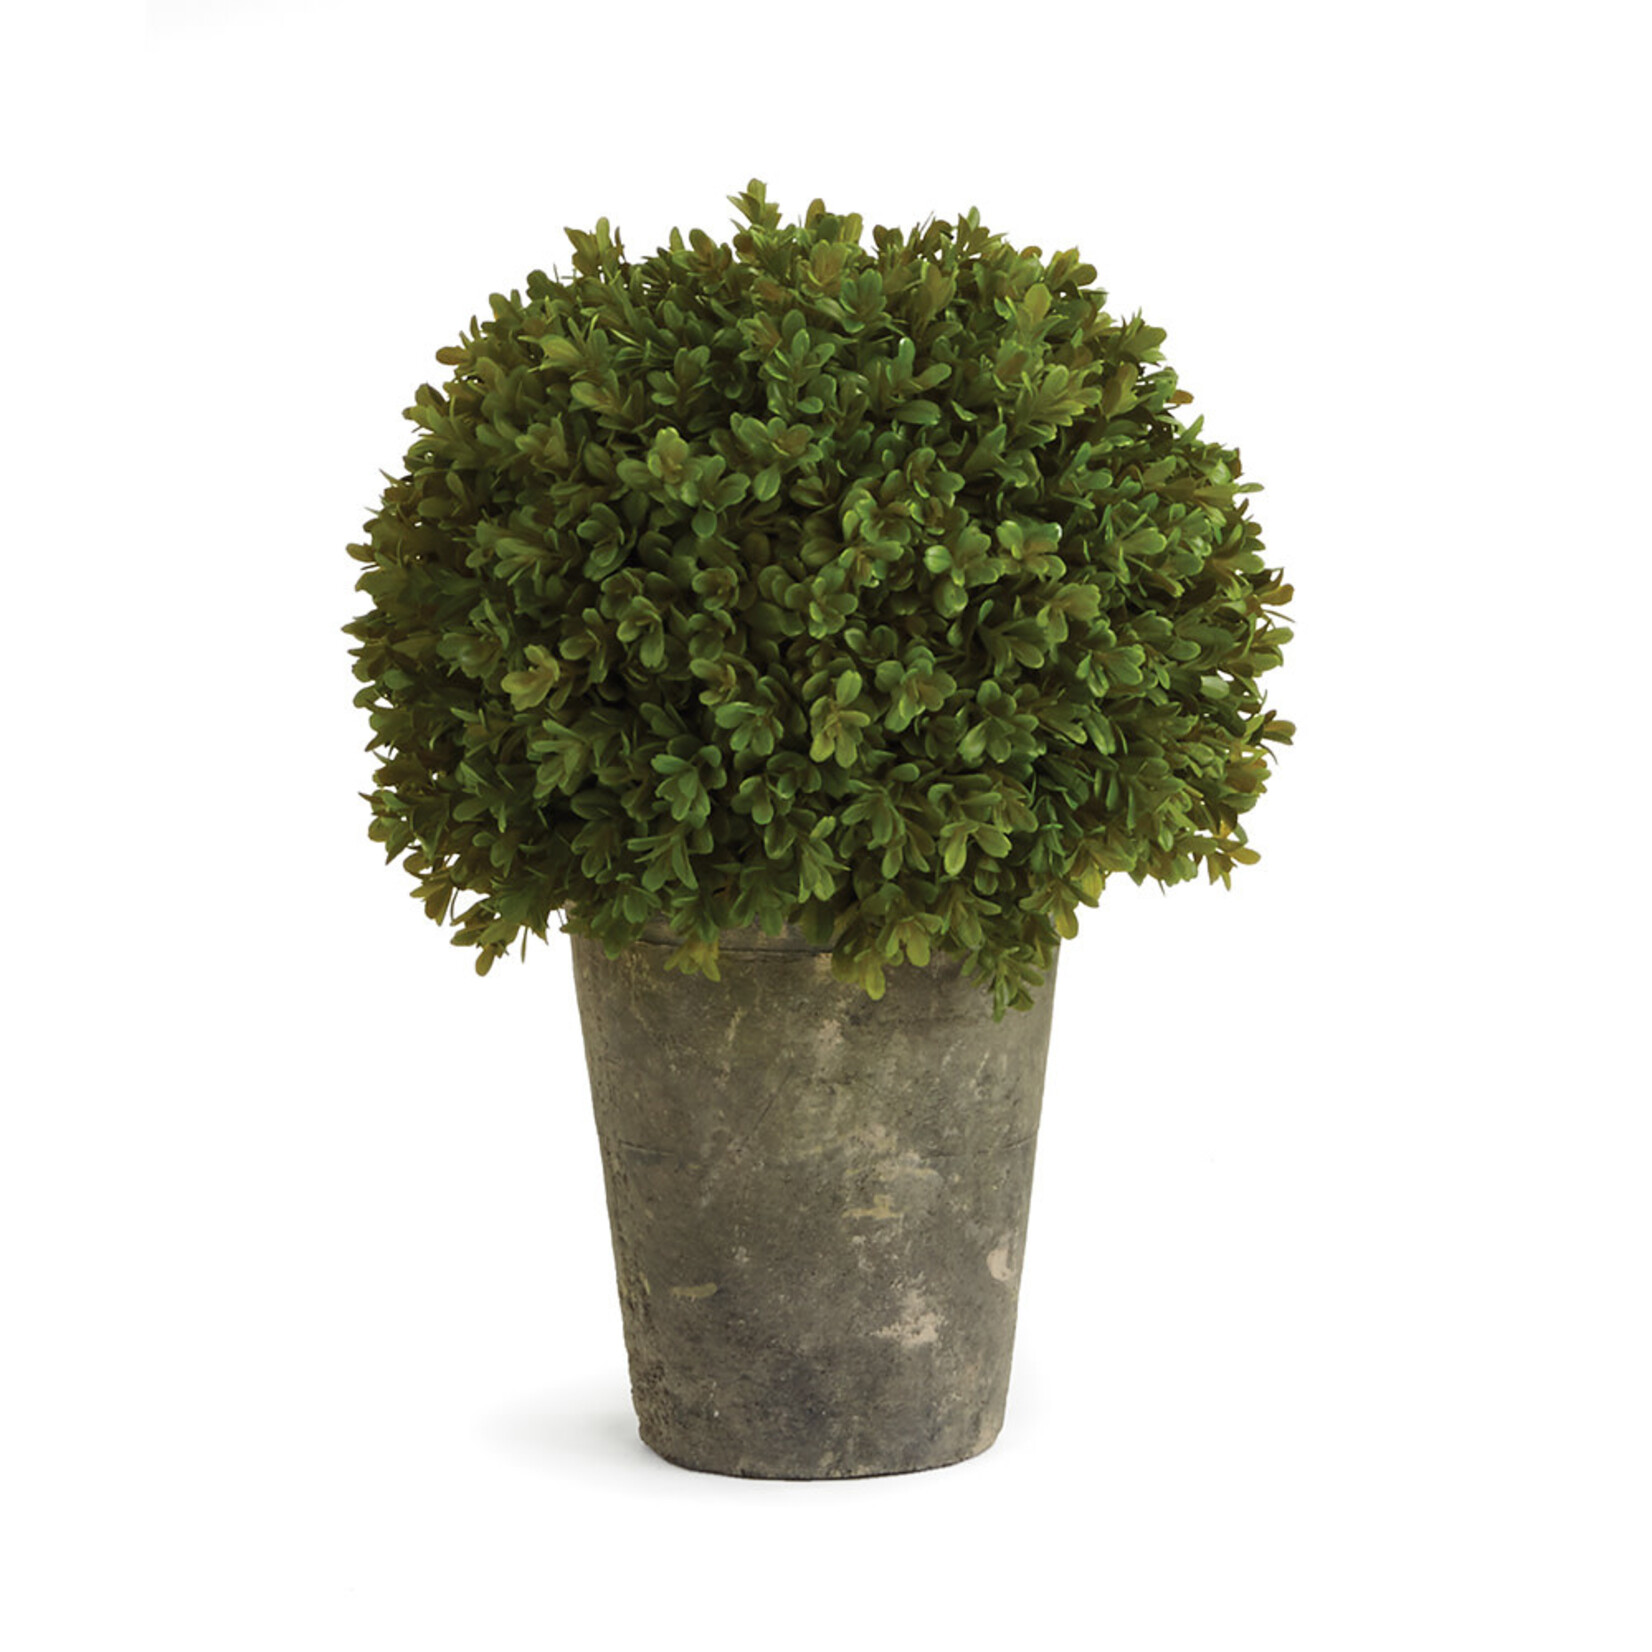 Napa Home and Garden Faux Boxwood Shrub Potted 13.5"